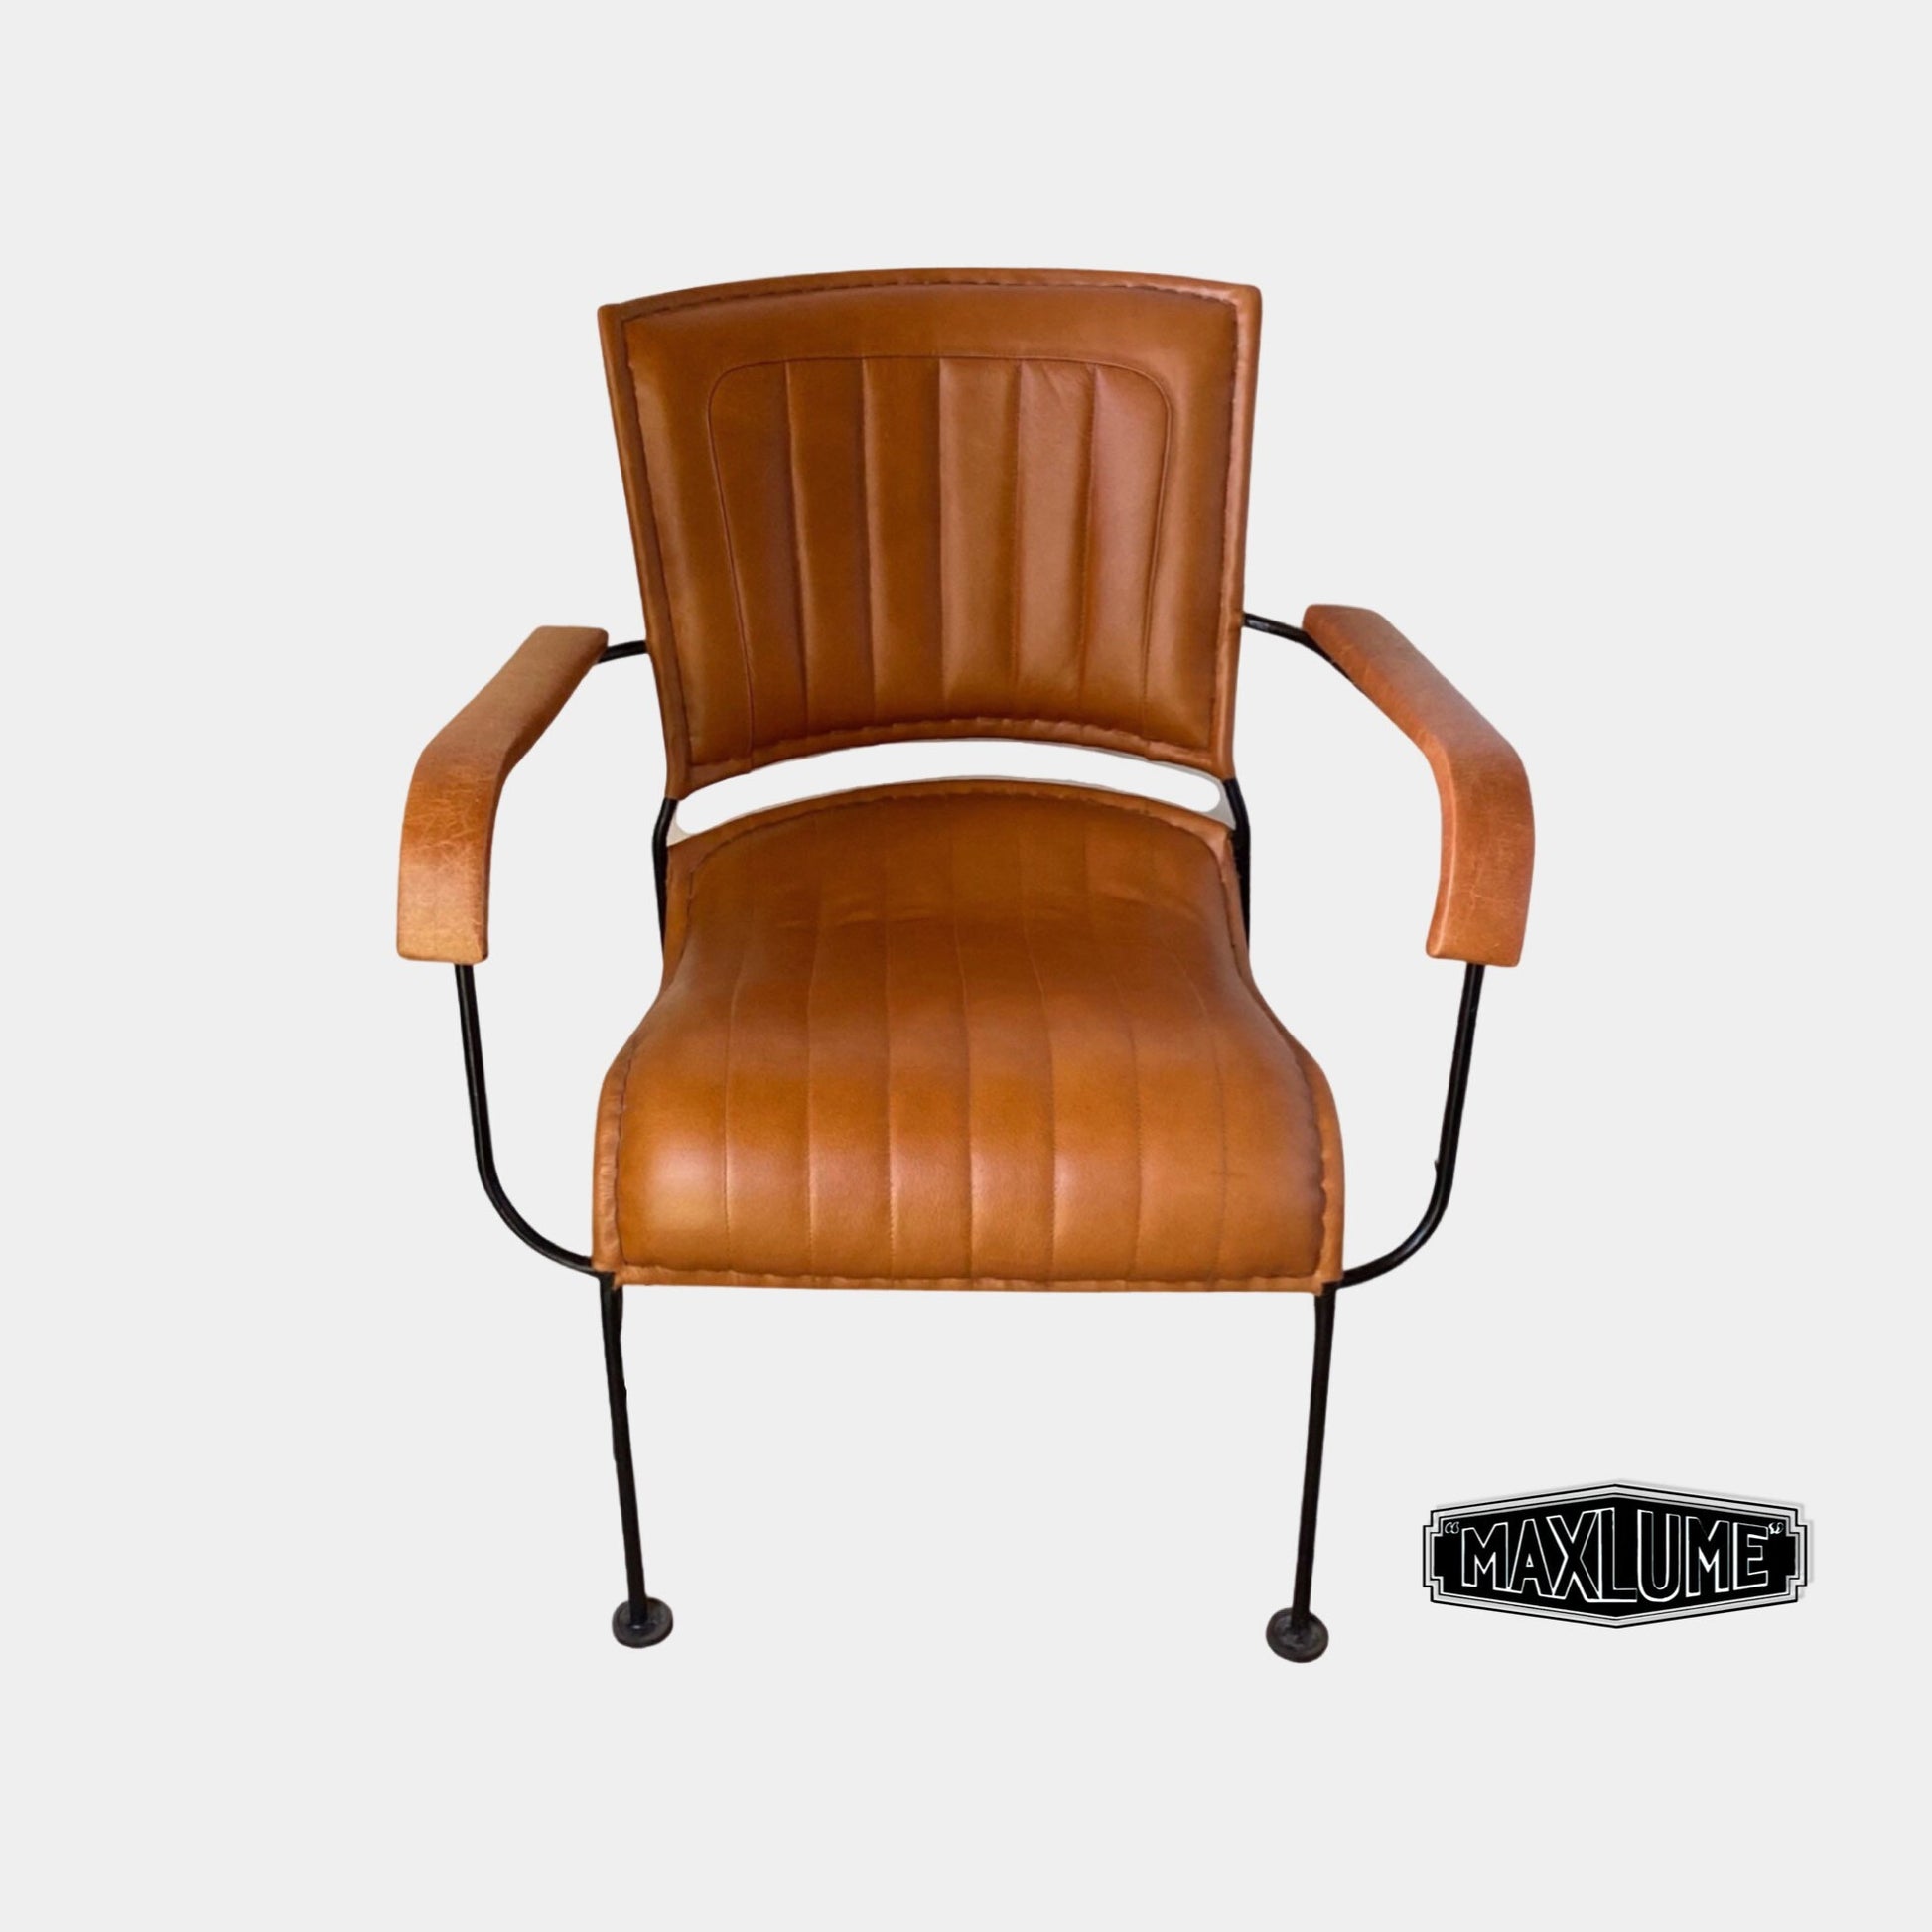 Maxlume ~ Lounger Chair Genuine Leather | Vintage Style | Solid Cast Metal | Floor Standing